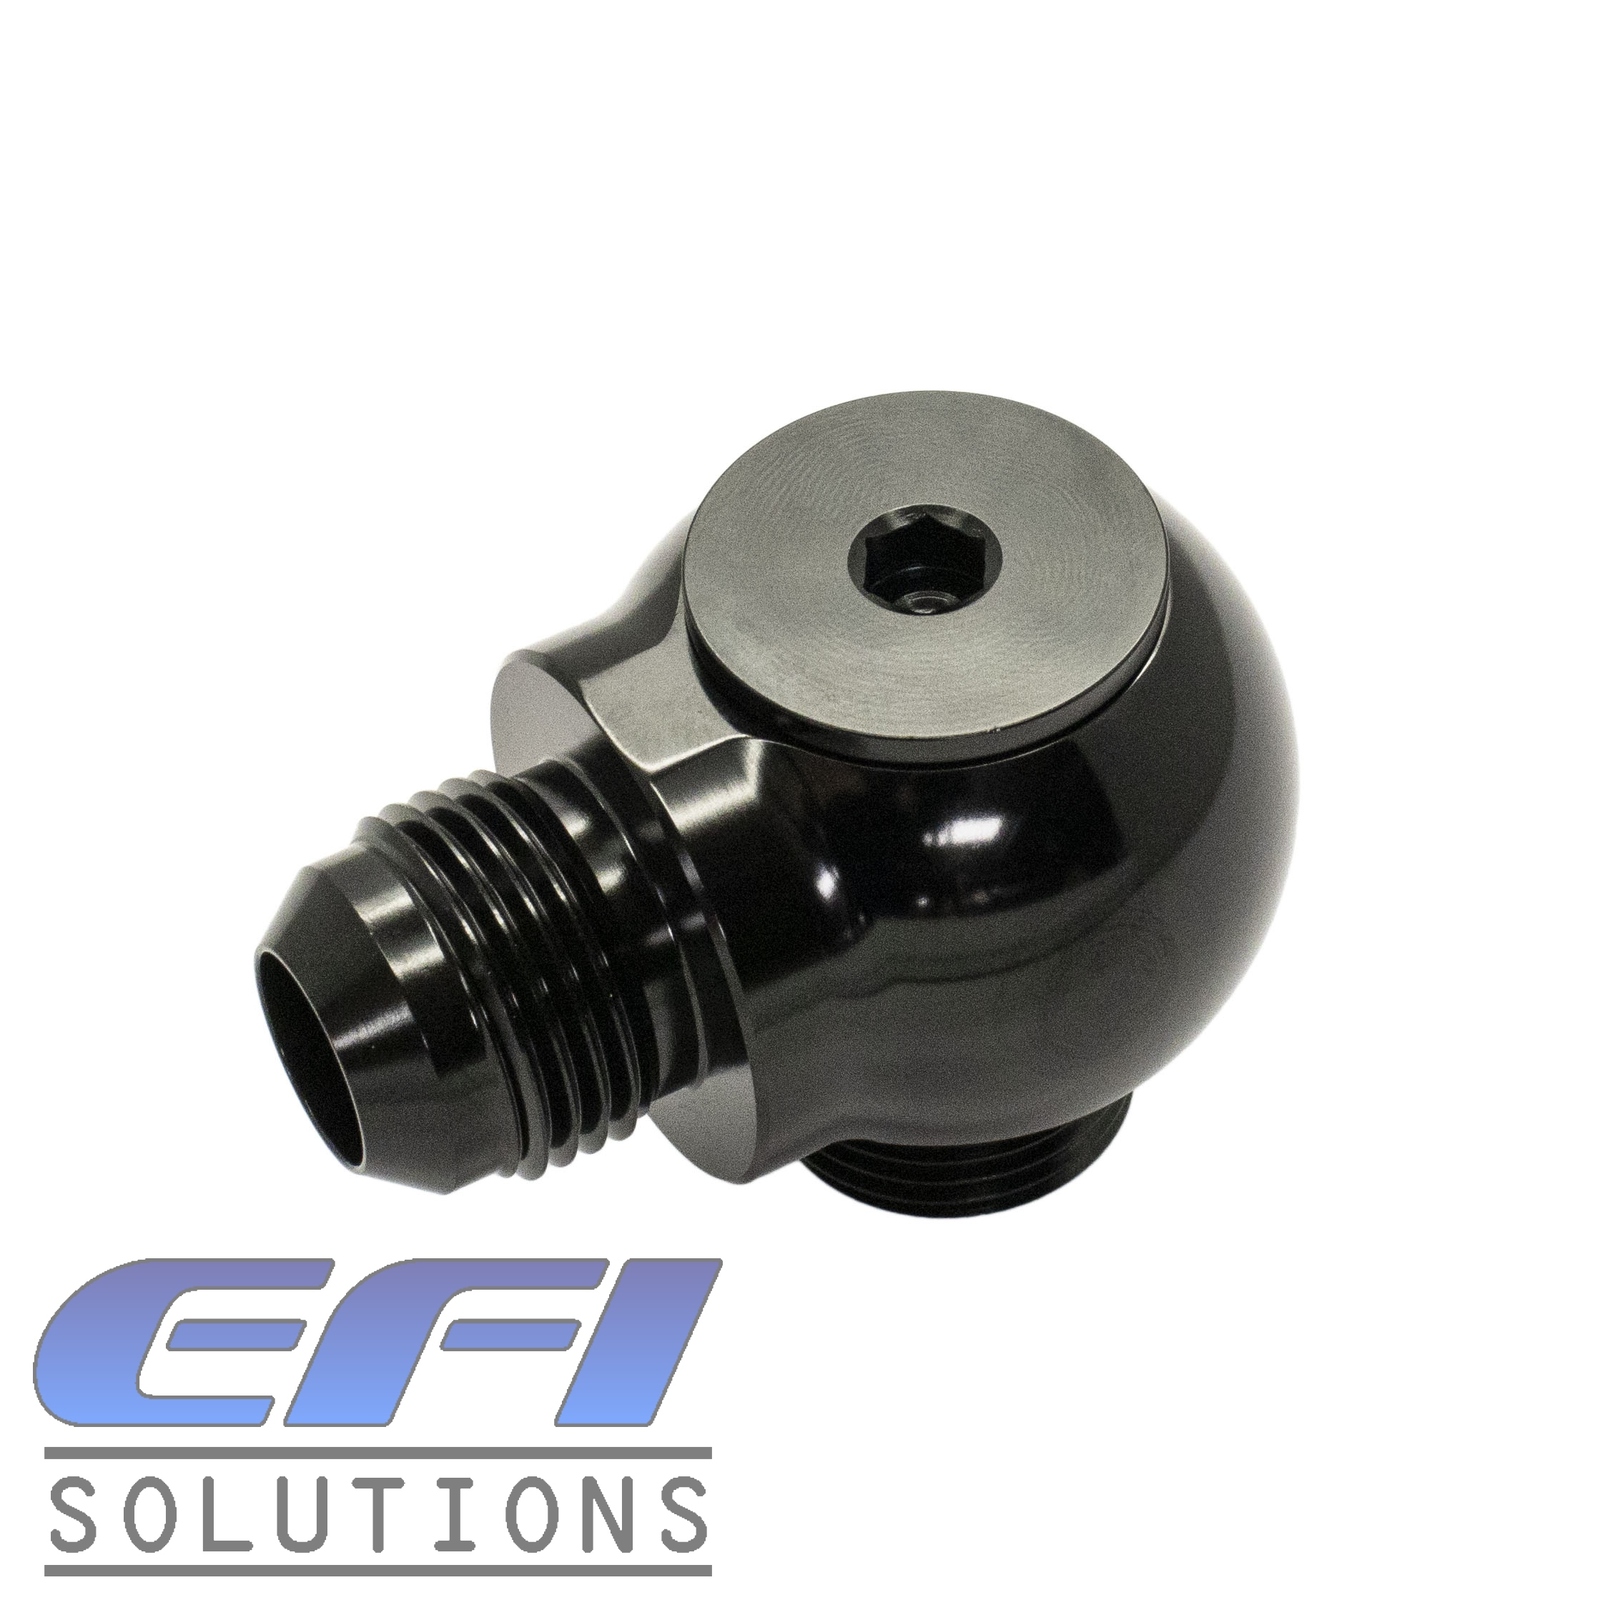 4AN AN4-4AN Aluminum Male Flare Plug Fitting with 4AN ORB O Ring Boss Thread 7/16-20 Seal Nut Block Off Cap Adapter 